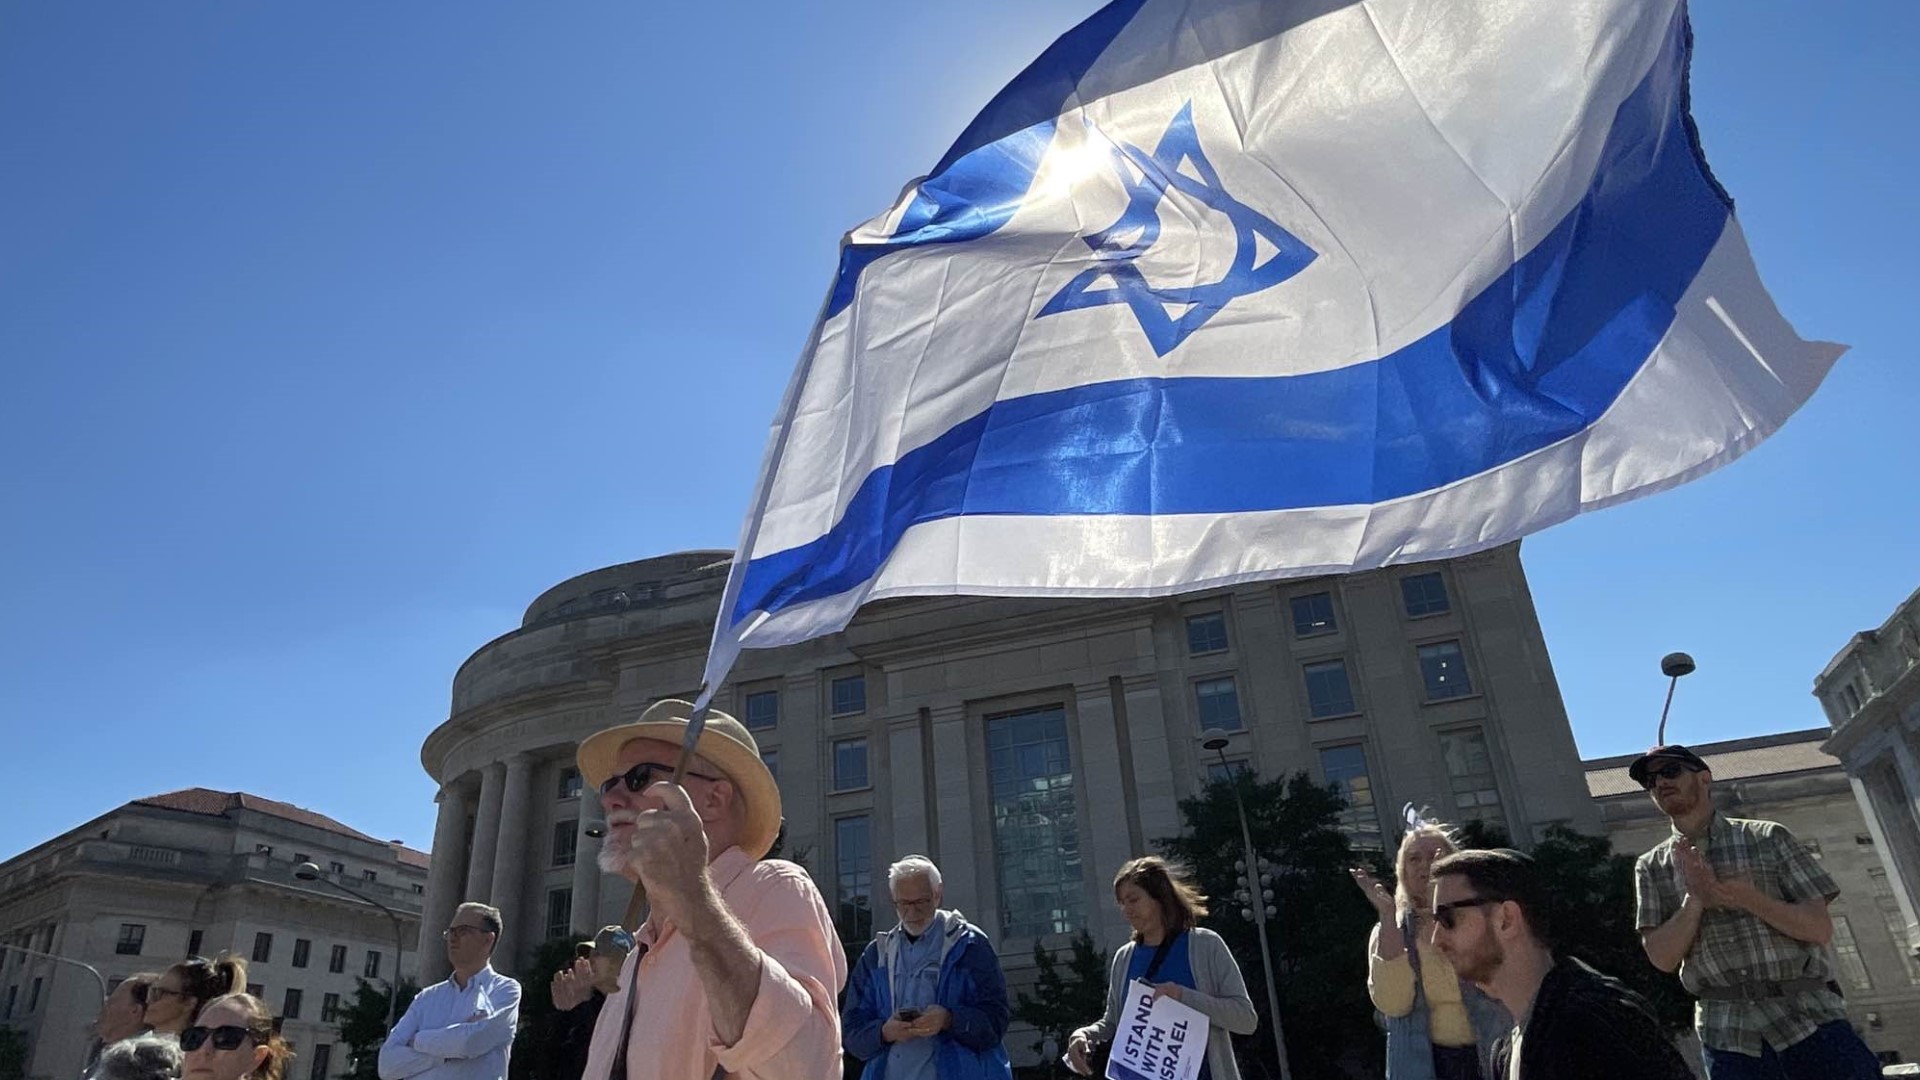 'March for Israel' November 14 on the National Mall